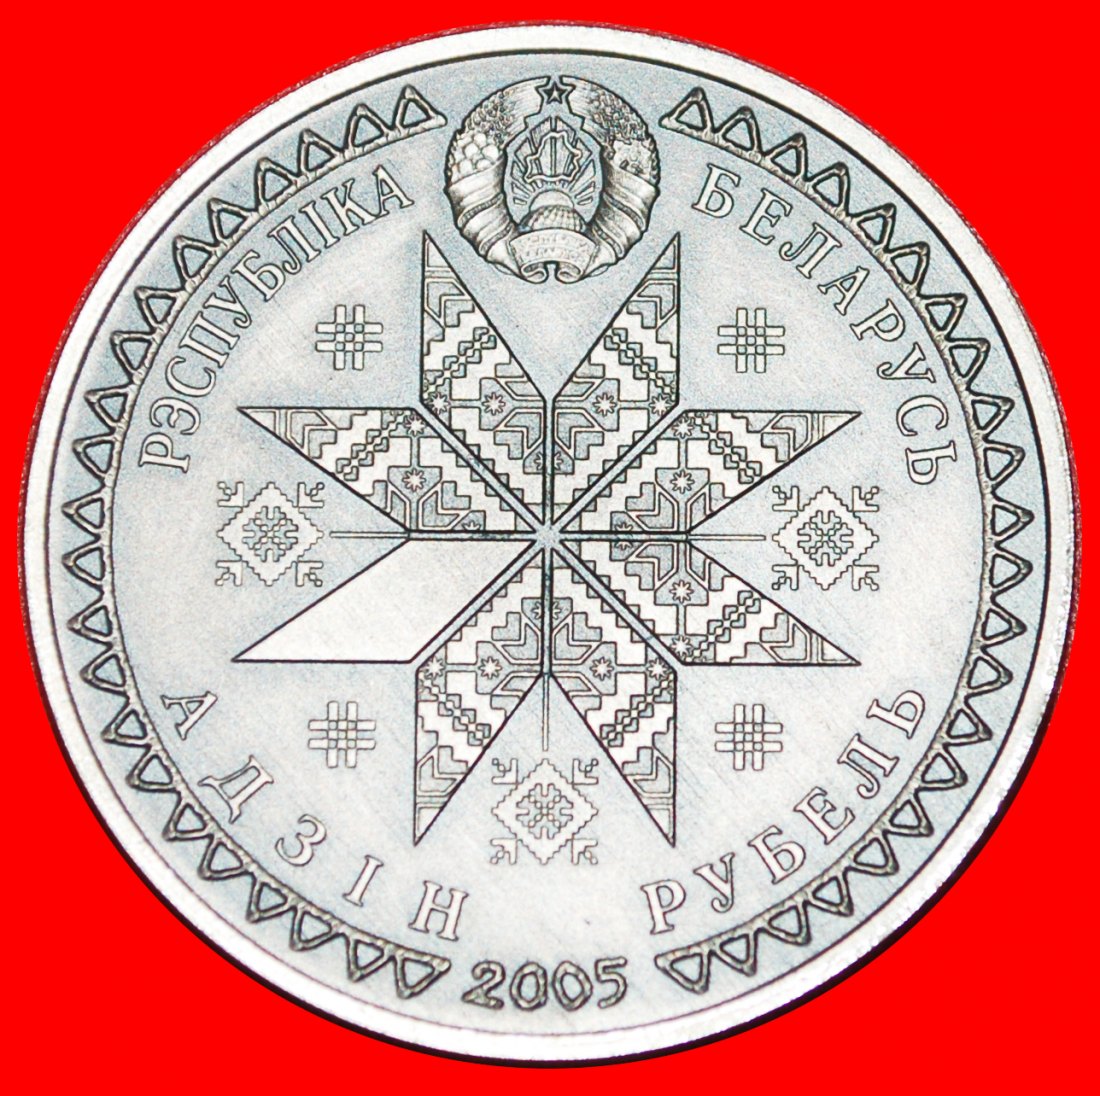  * RARE: belorussia (ex. the USSR, russia)★1 ROUBLE 2005★BOGACH RITE ASTRONOMY★LOW START★ NO RESERVE!   